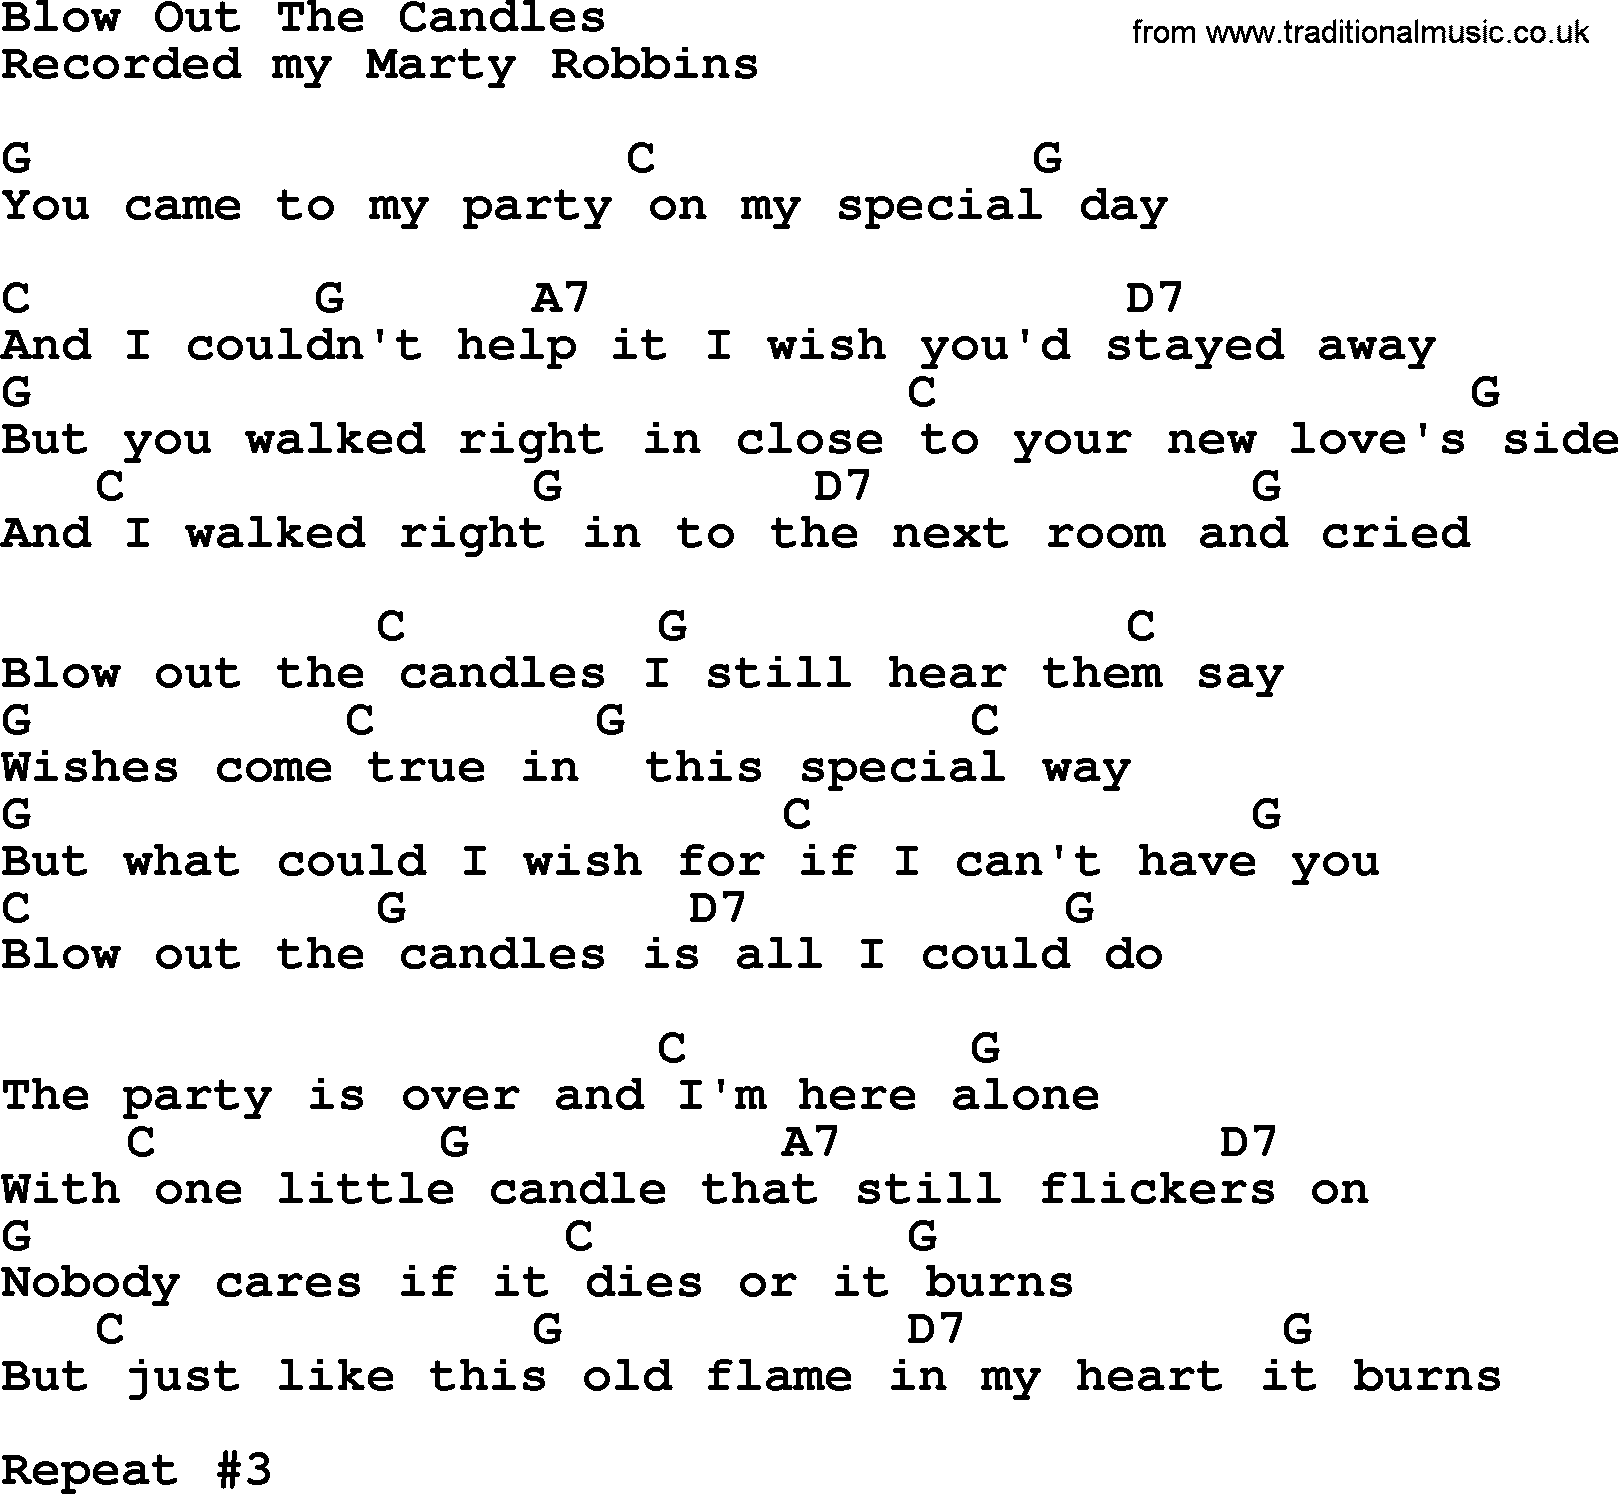 Marty Robbins song: Blow Out The Candles, lyrics and chords